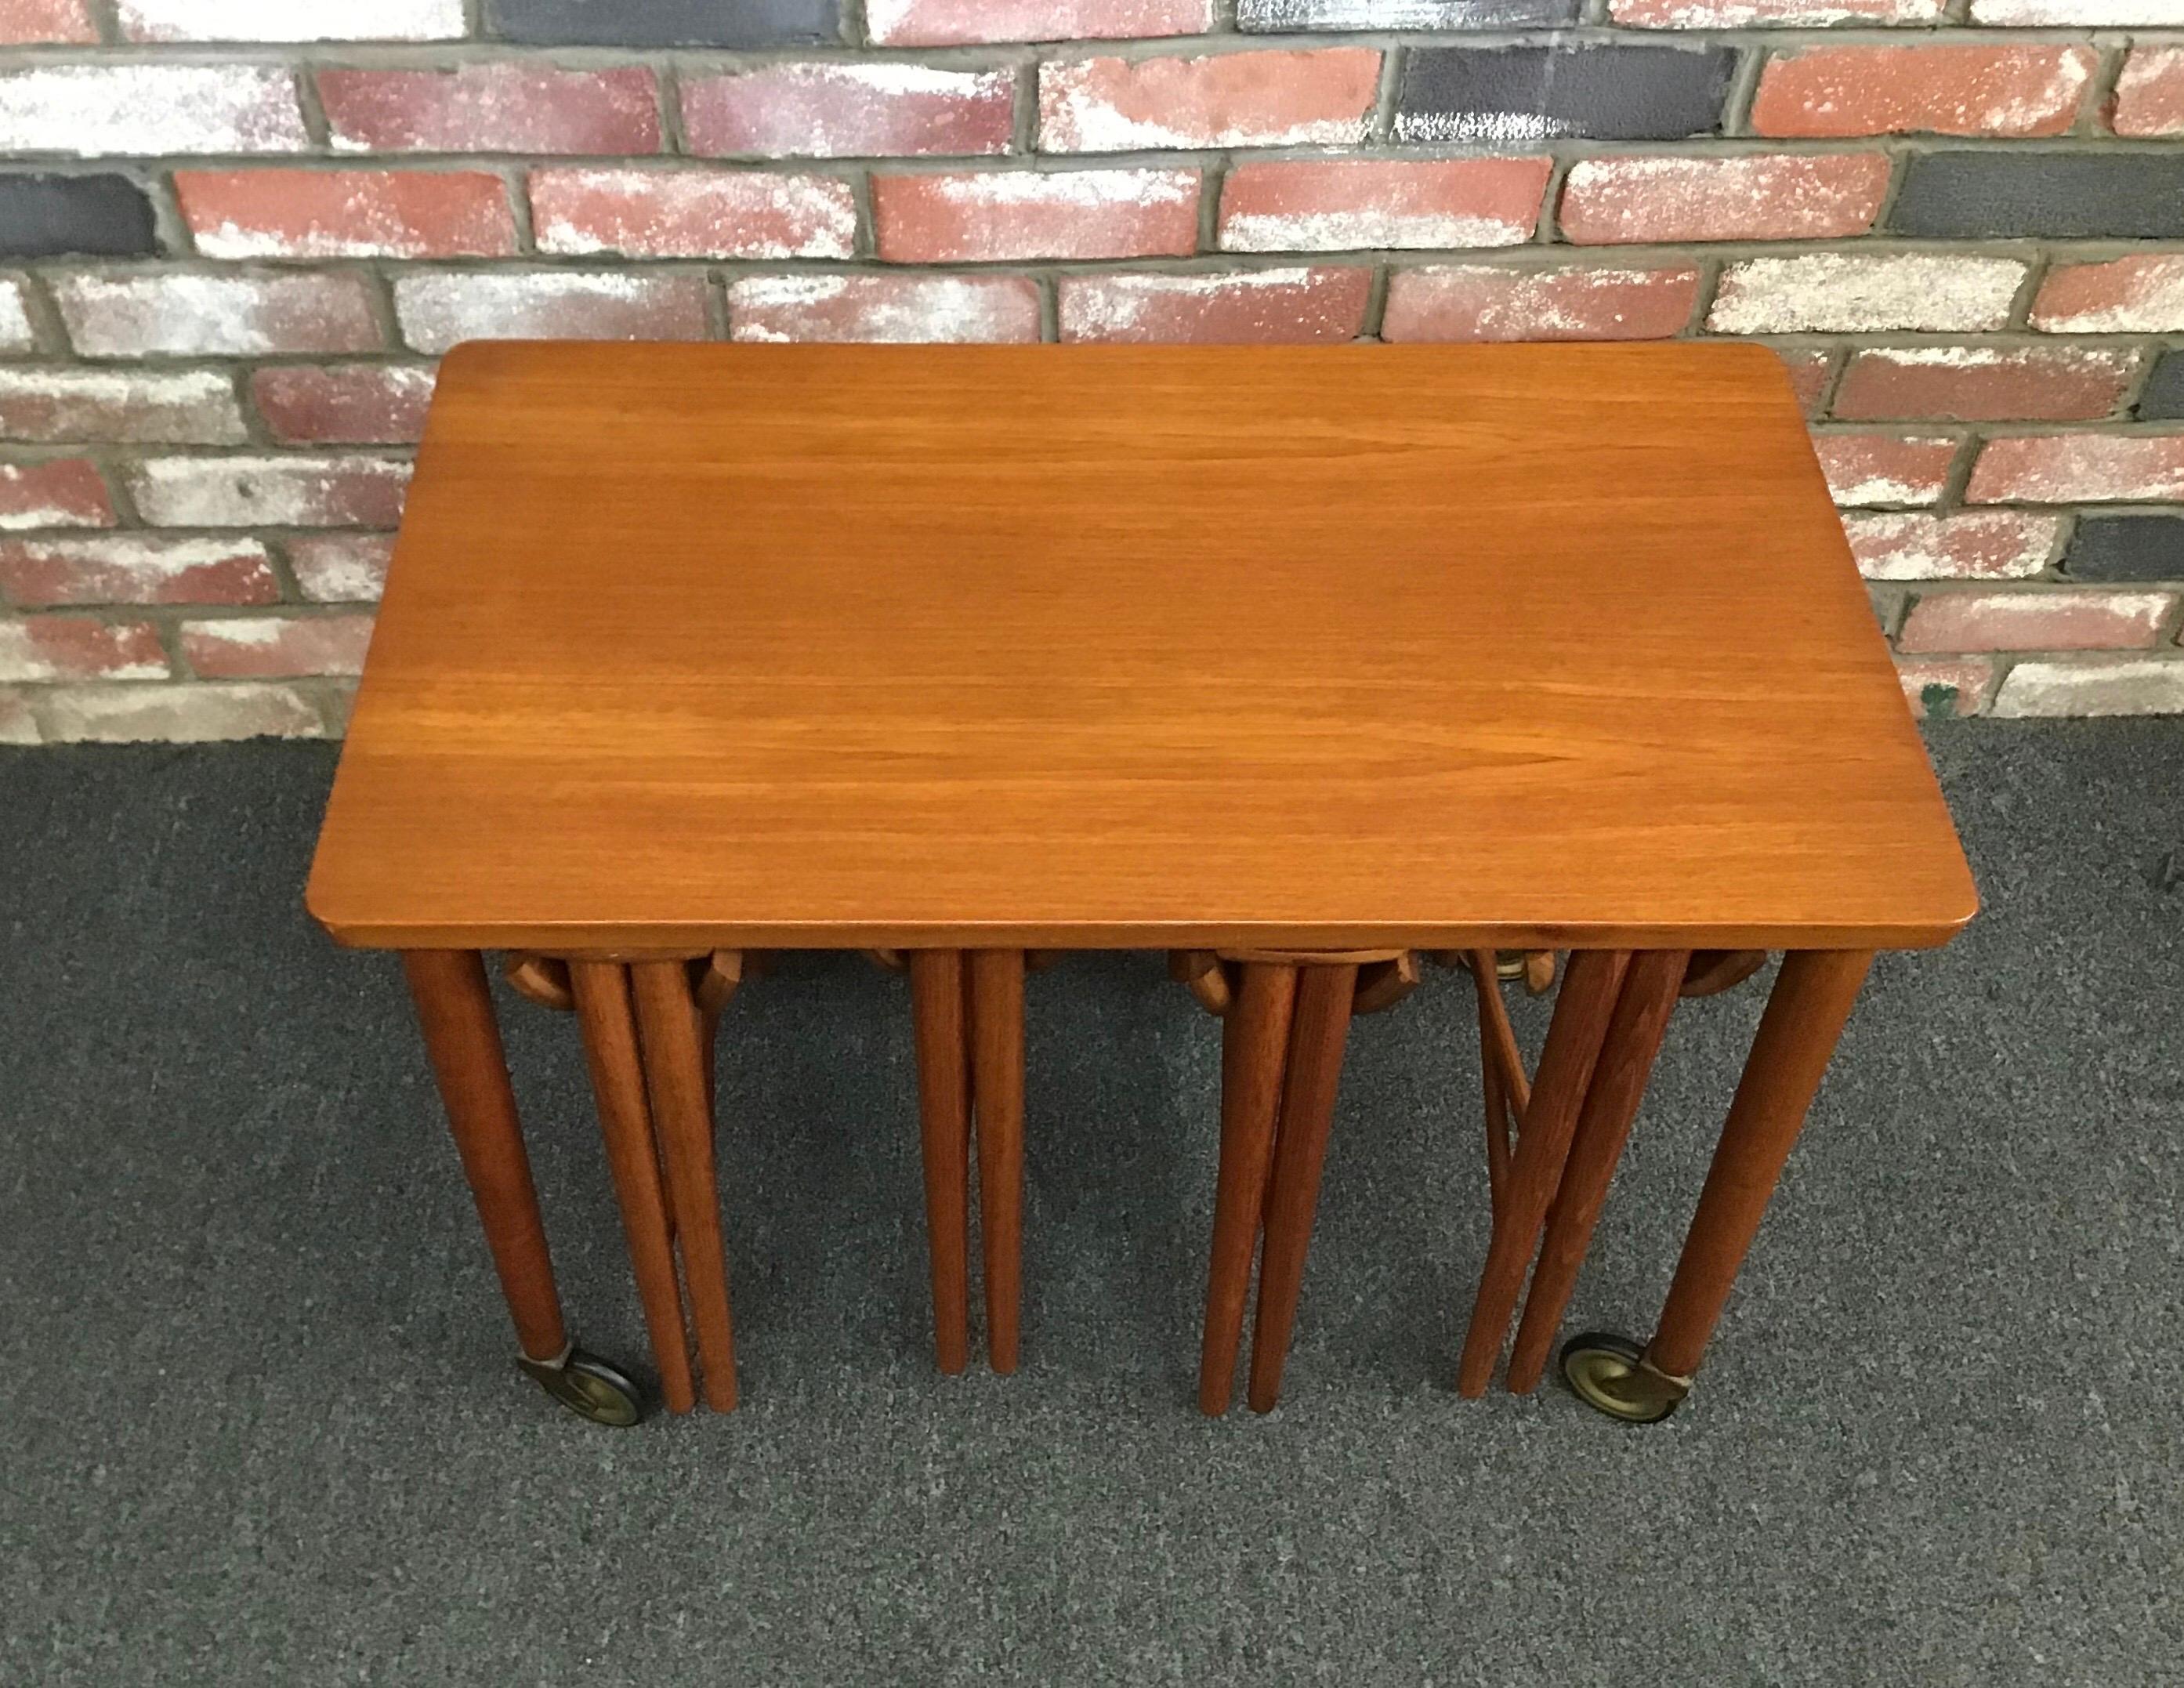 Ingenious set of five Danish modern nesting tables by Carlo Jensen for Hundevad, circa 1950s. A very nice rectangle side teak side table (on removable wheels) stores four individual small round folding tables. This super rare piece is a great